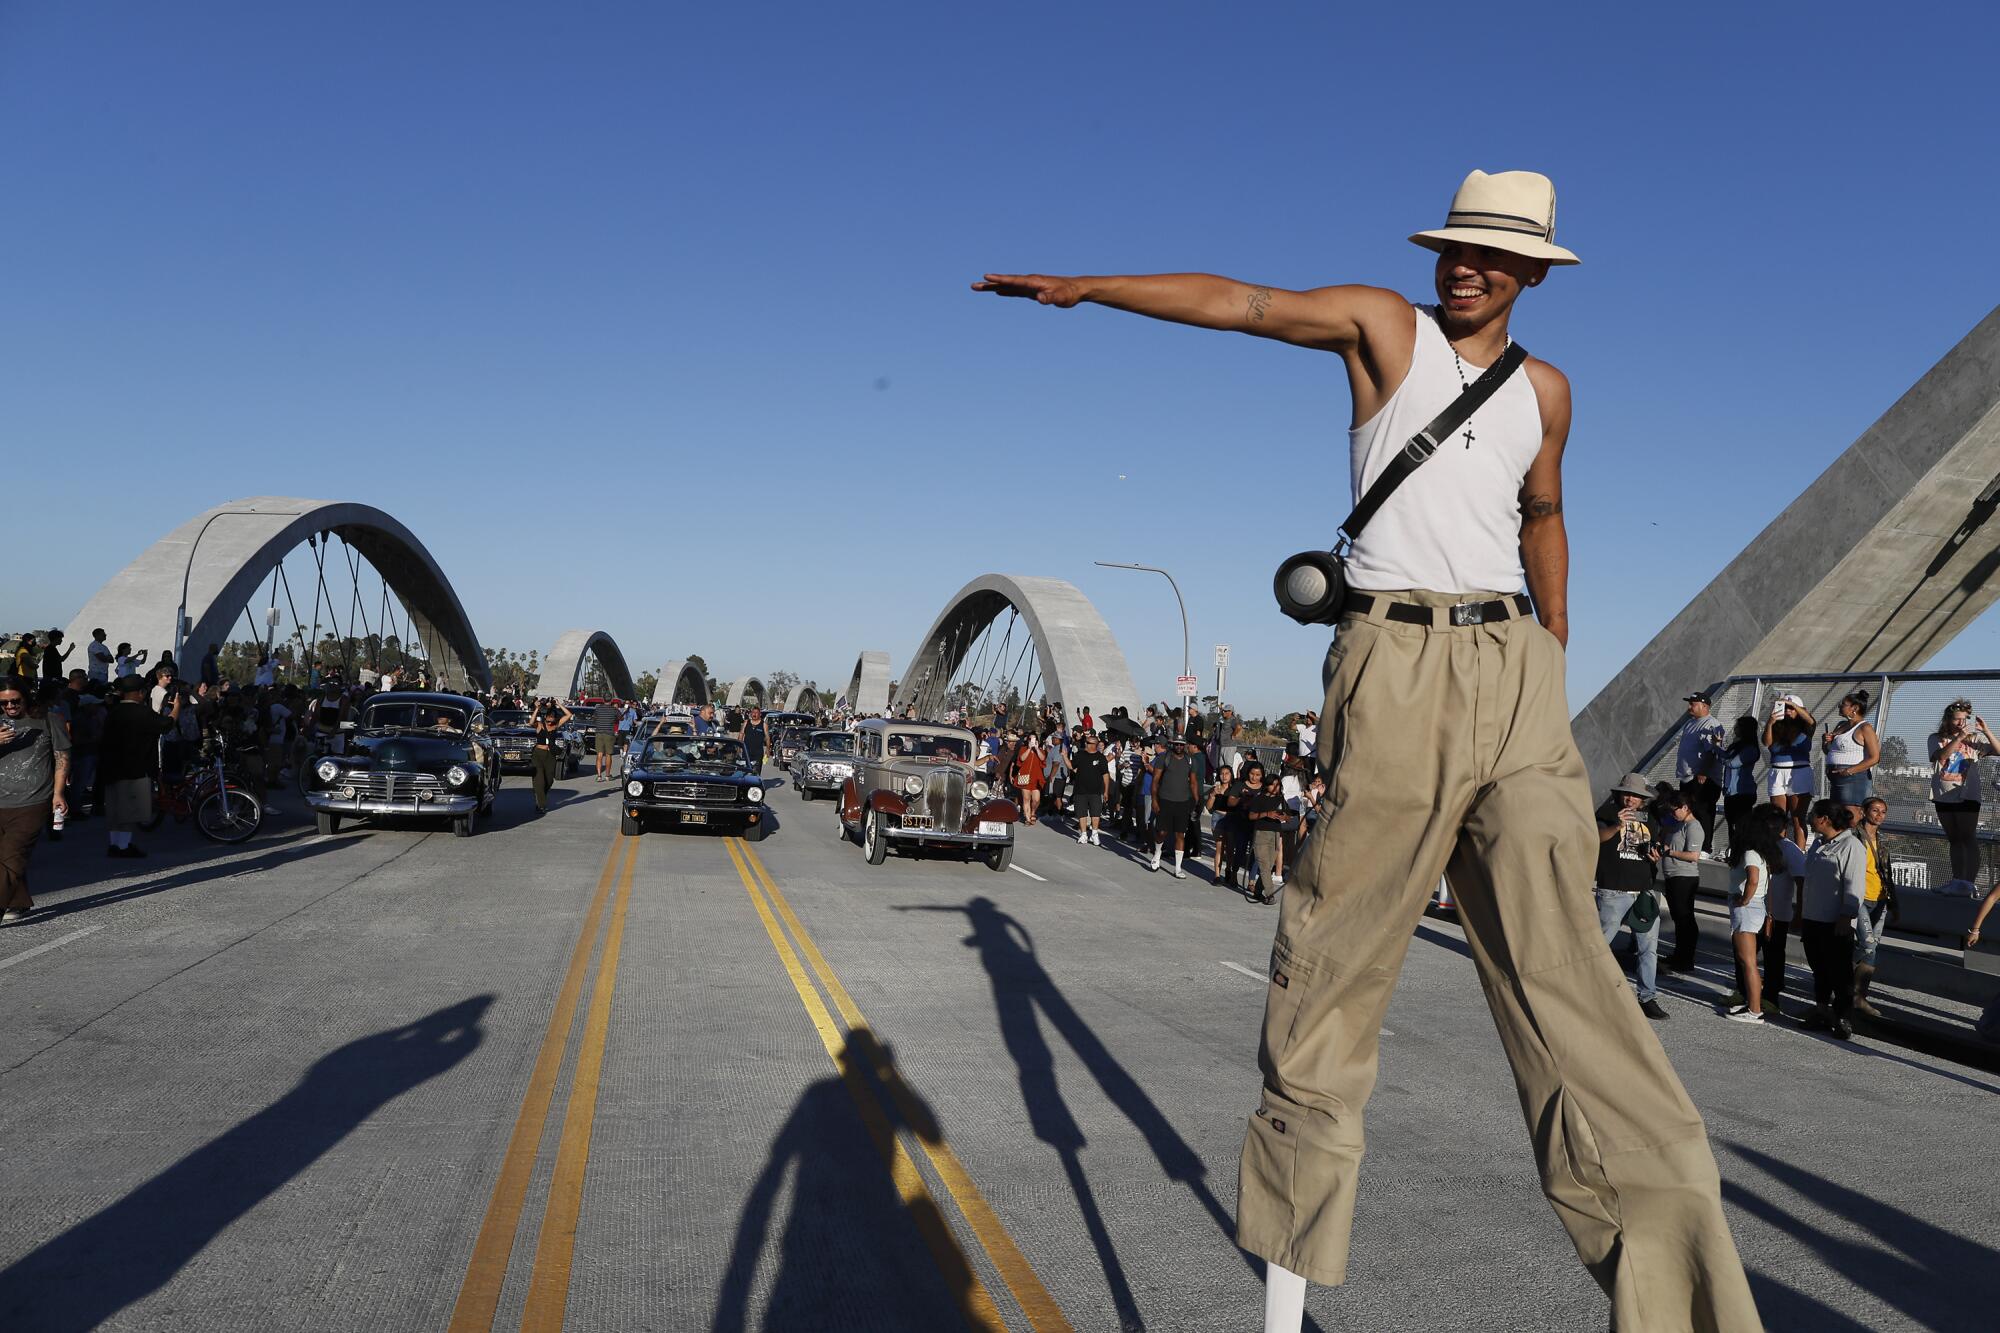 A man on stilts is shown with a group of lowriders on the 6th Street Viaduct.